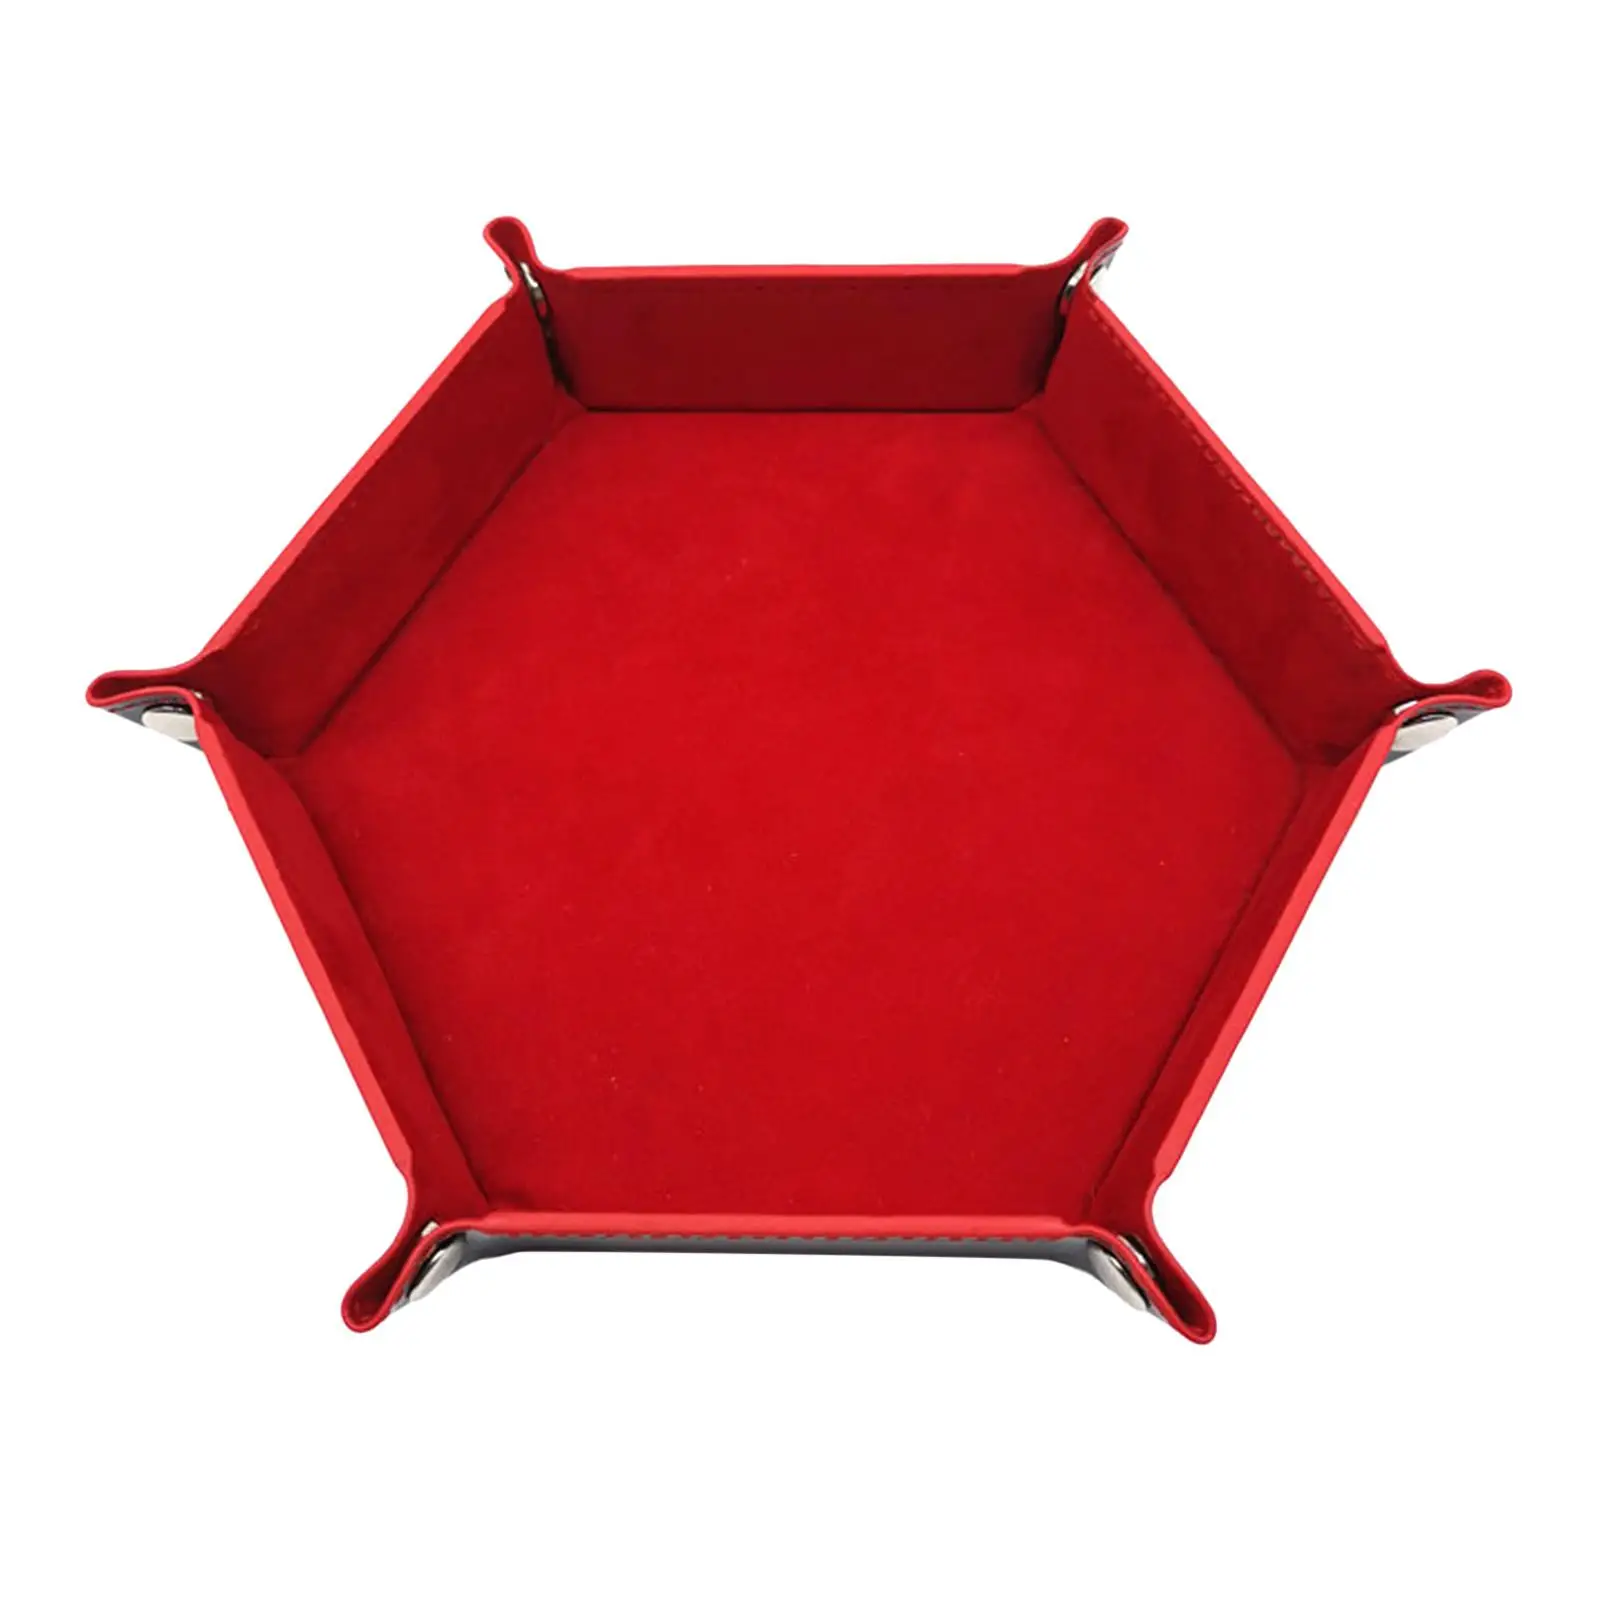 Folding Dice Tray Hexagonal Turntable Rolling Tray Storage Holder Dices Game Bar Party Supplies for Role Playing Game Accessory